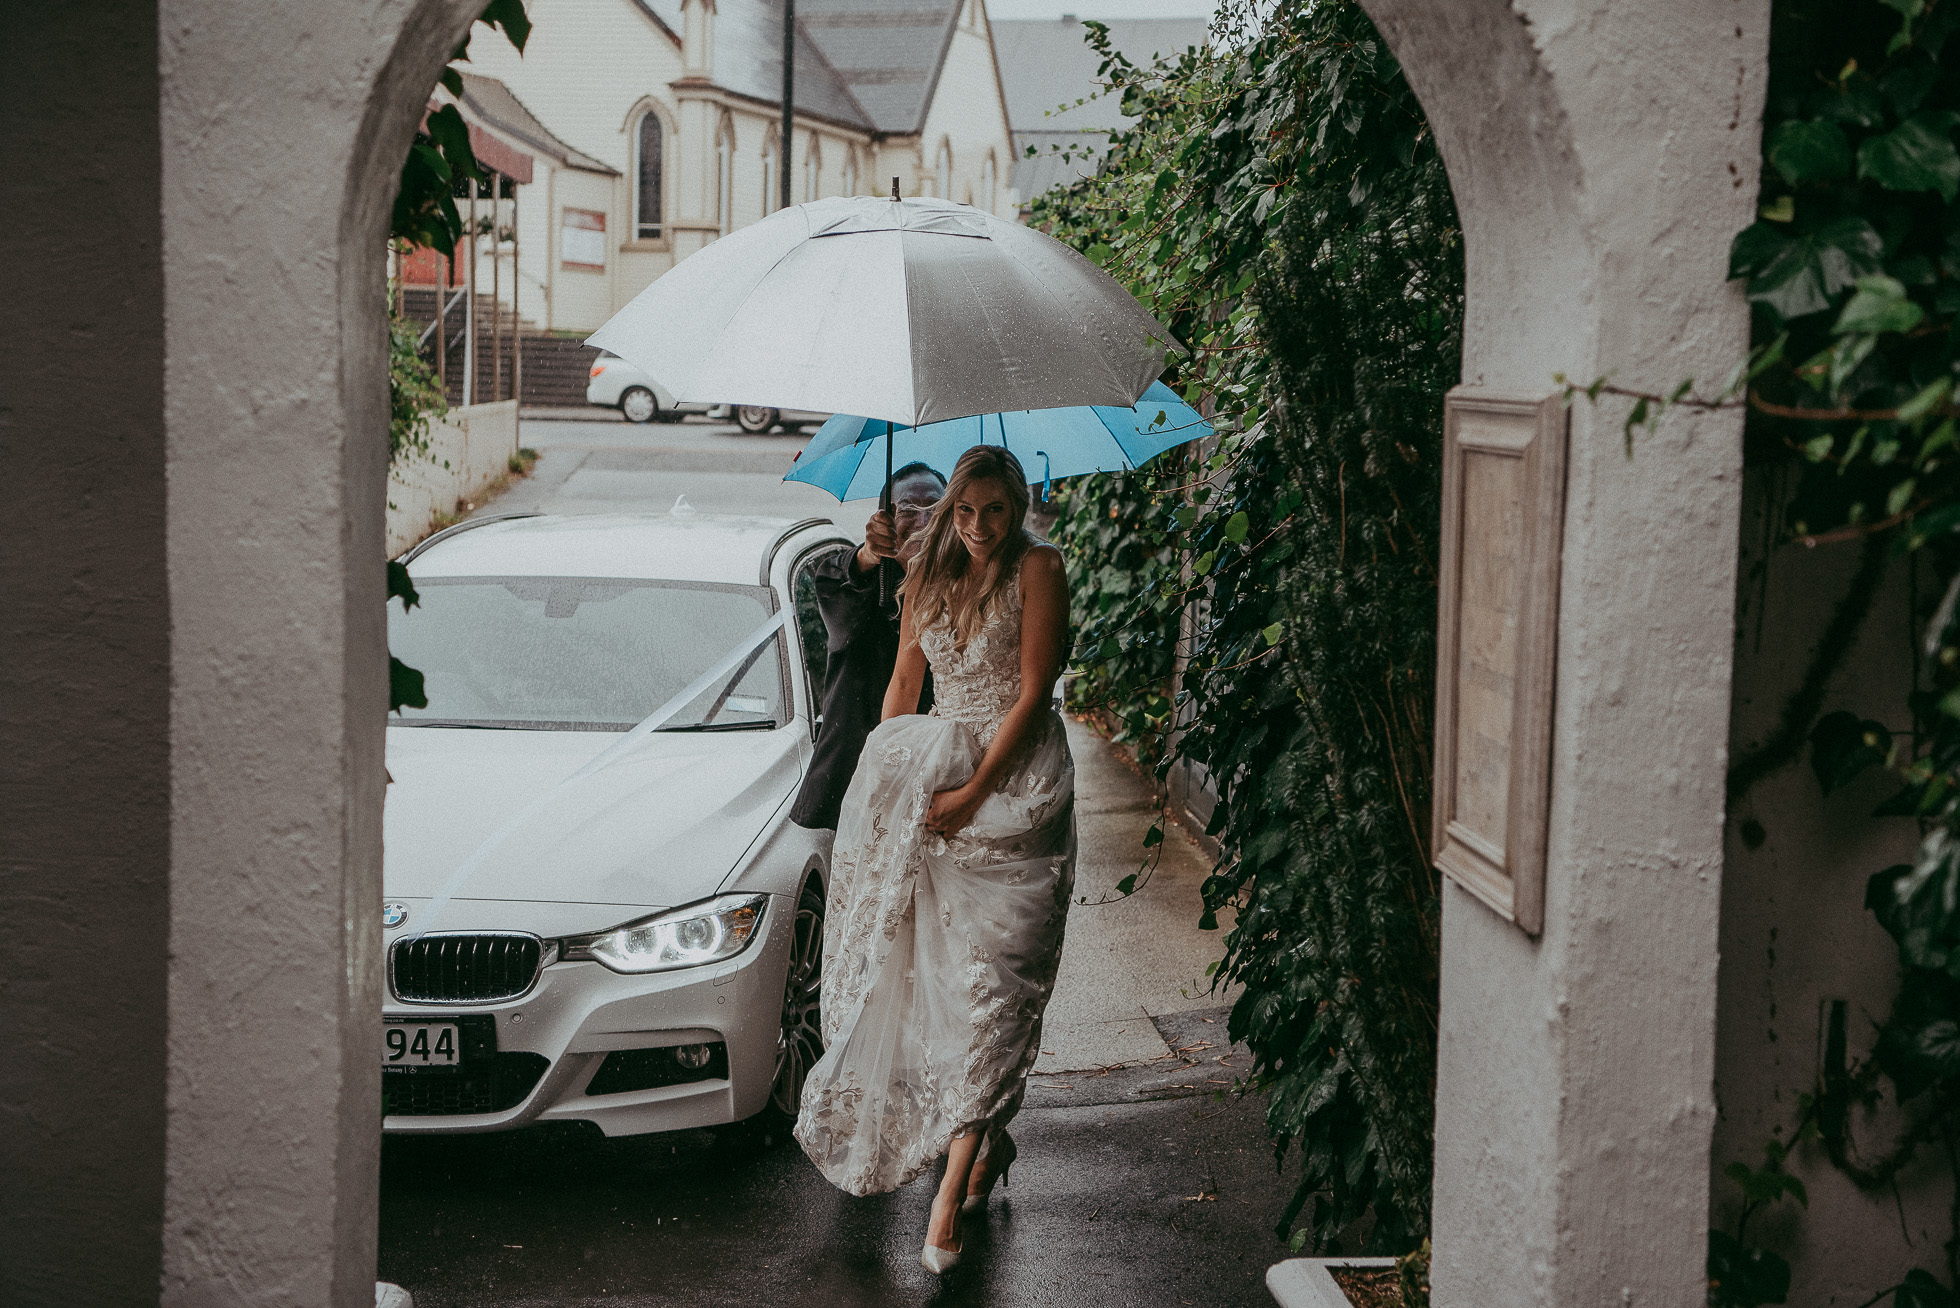 Rainy day wedding in Mantells {weddings photography in Auckland}